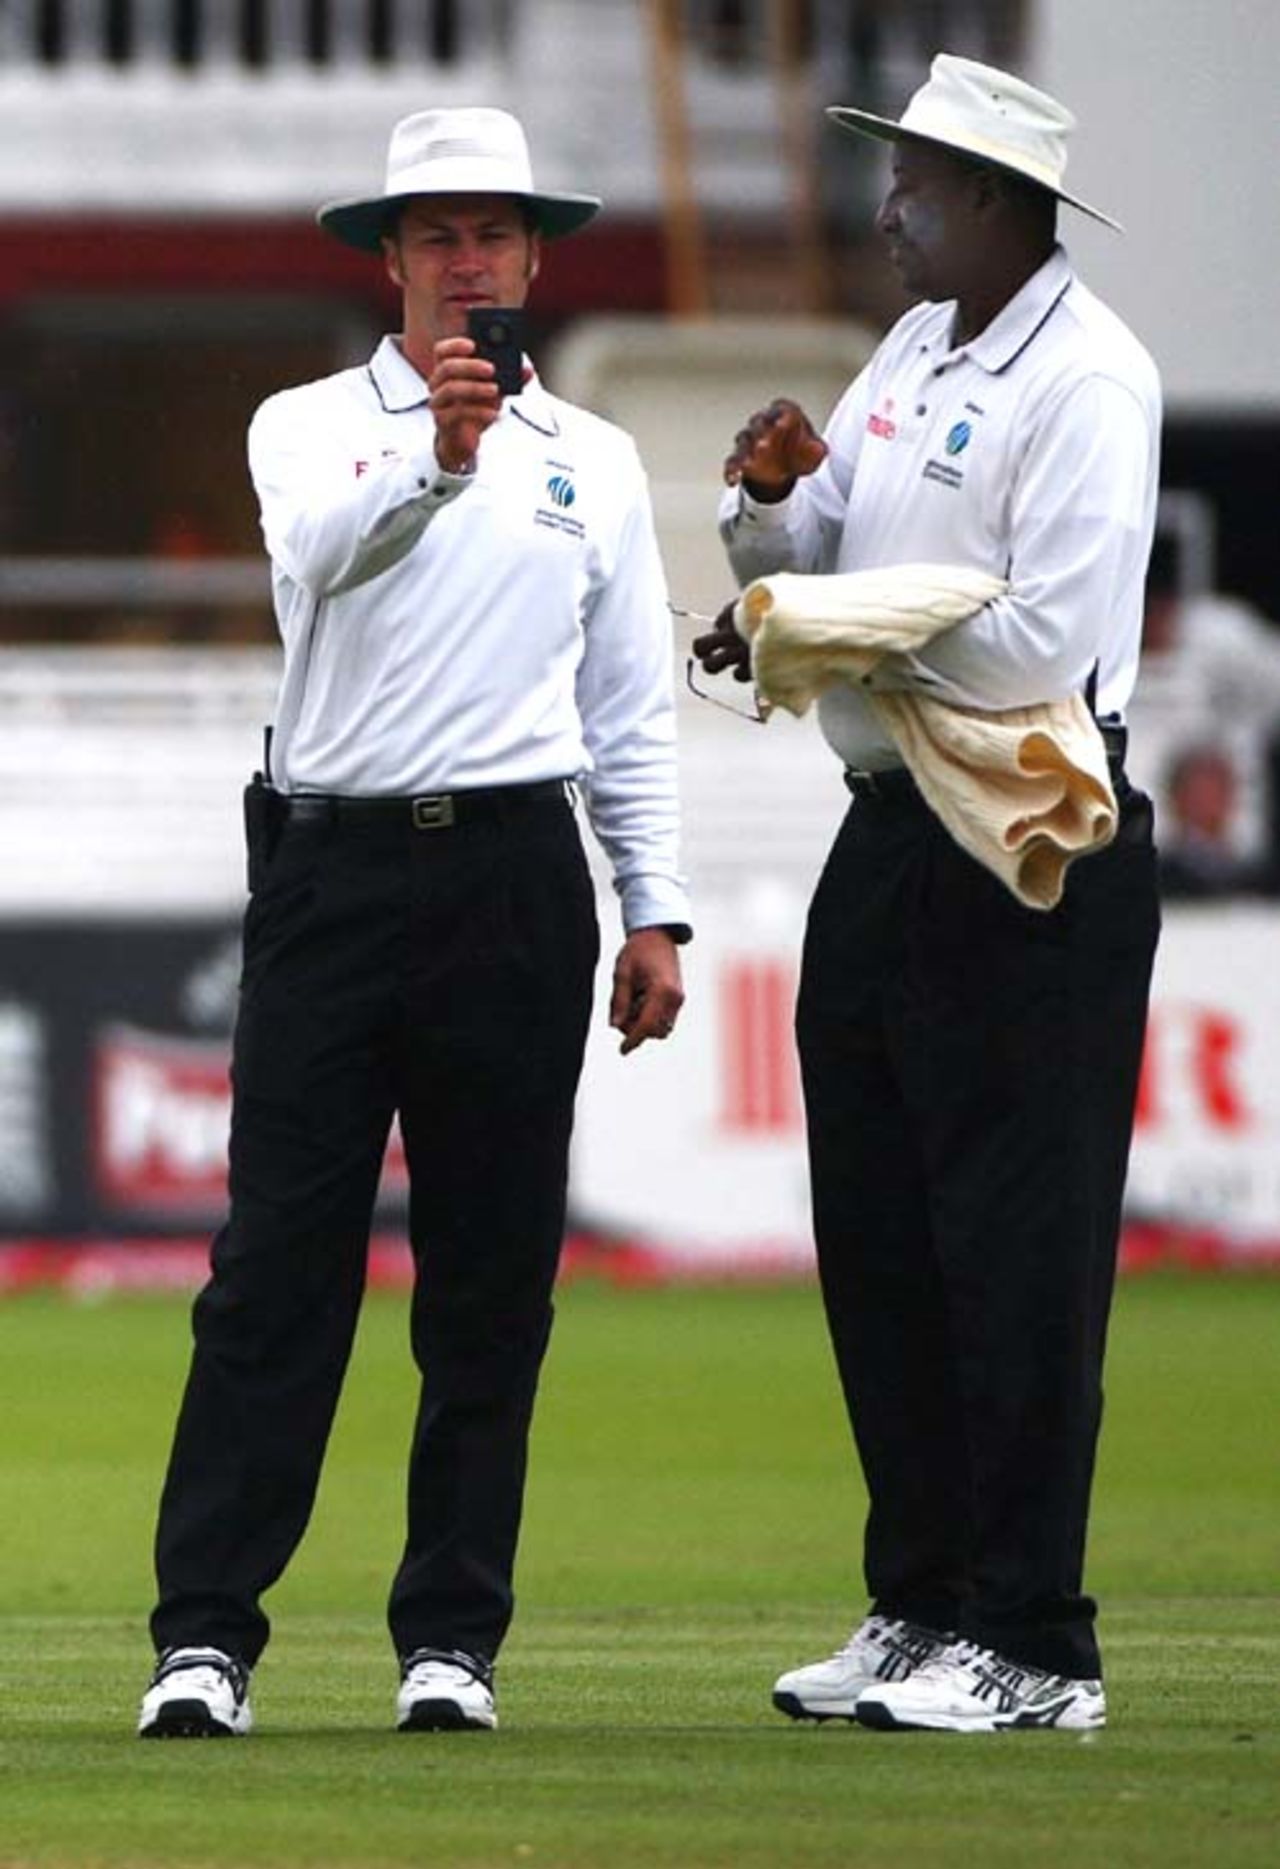 Simon Taufel checks the light while Steve Bucknor looks on, England v India, 1st Test, Lord's, 5th day, July 23, 2007 